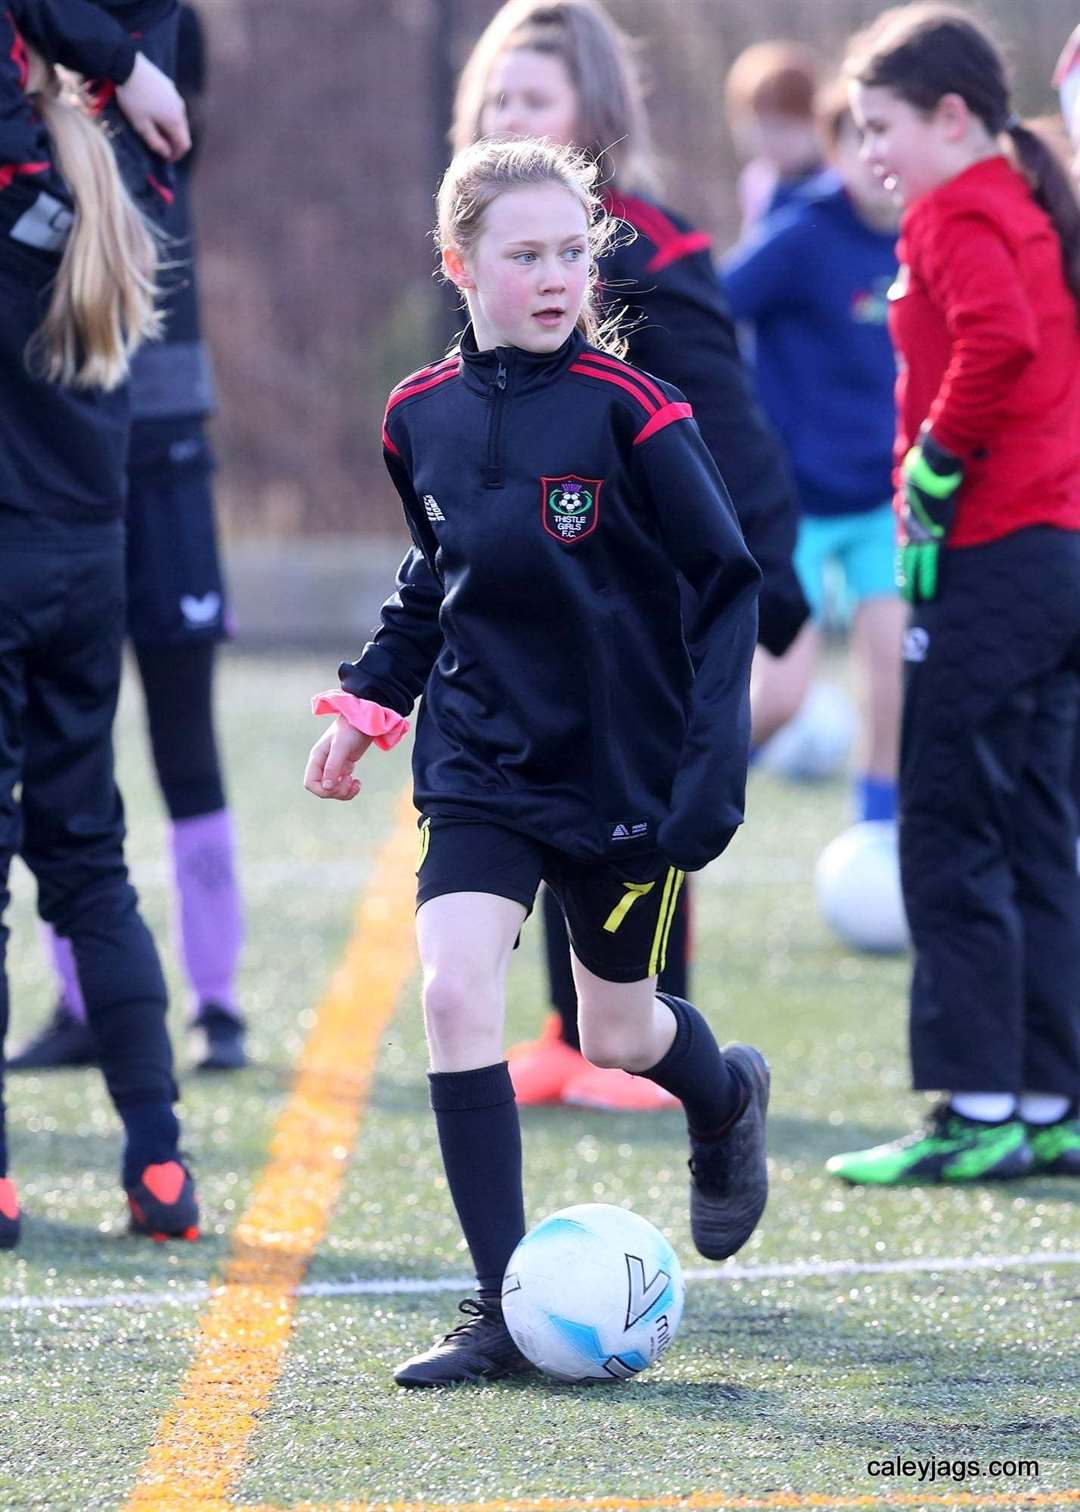 Thistle Girls' younger age groups return to training under Caley Thistle's guidance after threat to future of girls' football in Inverness